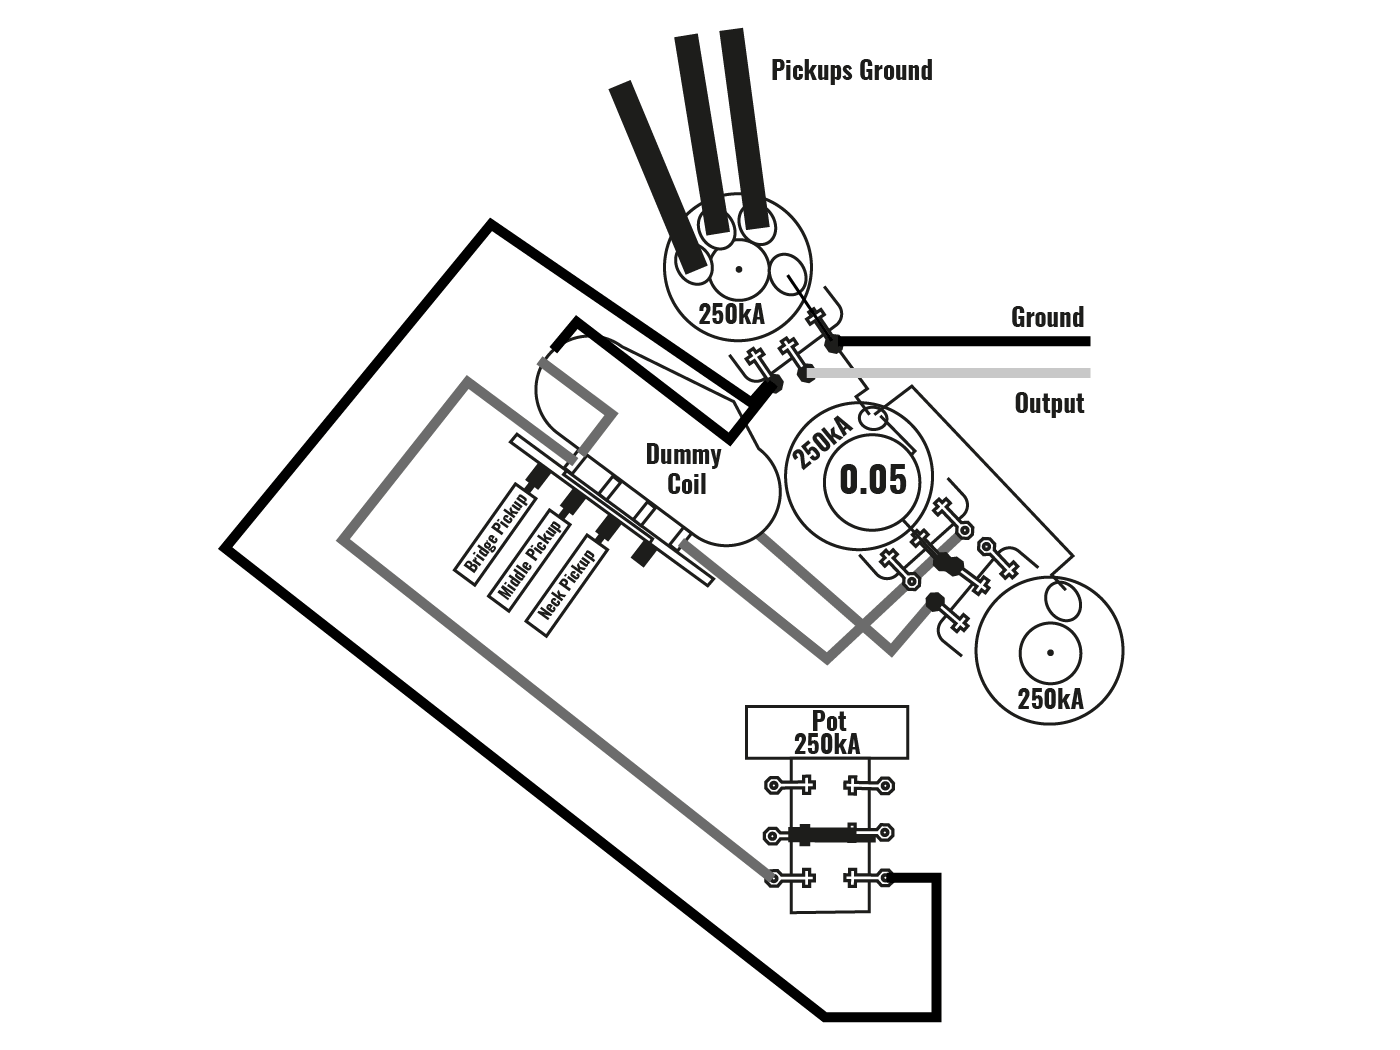 stratocaster dummy coil circuitry wiring diagram